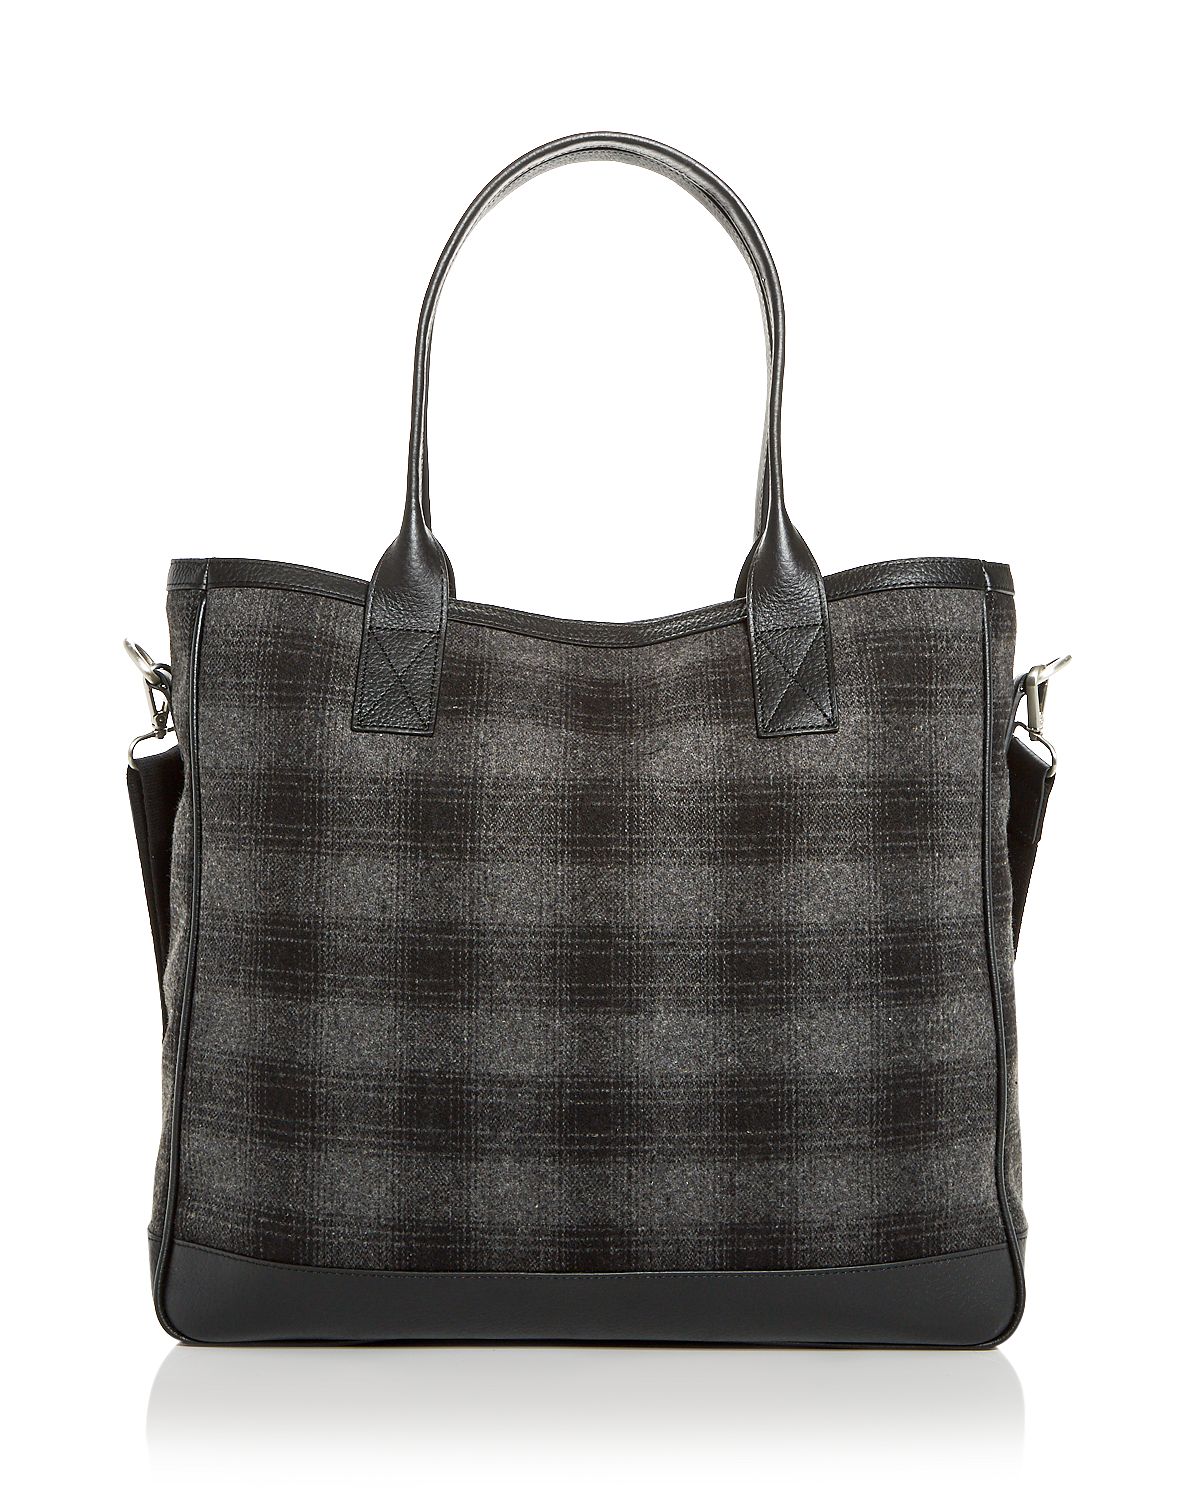 The Men's Store Plaid Wool Tote Gray